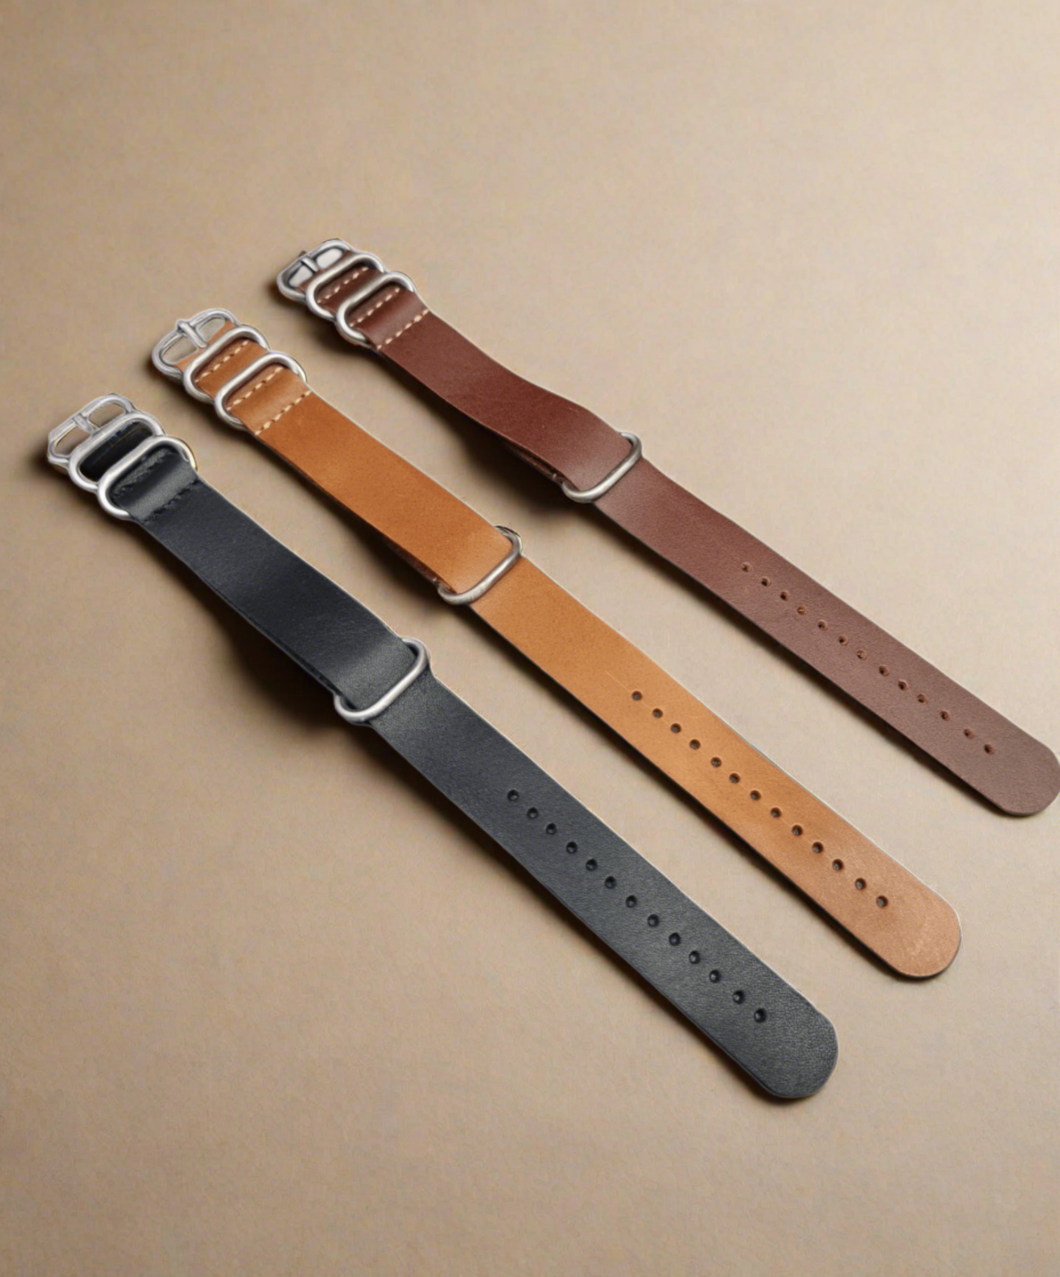 Indianleathercraft Watch Bands Handmade nato leather strap